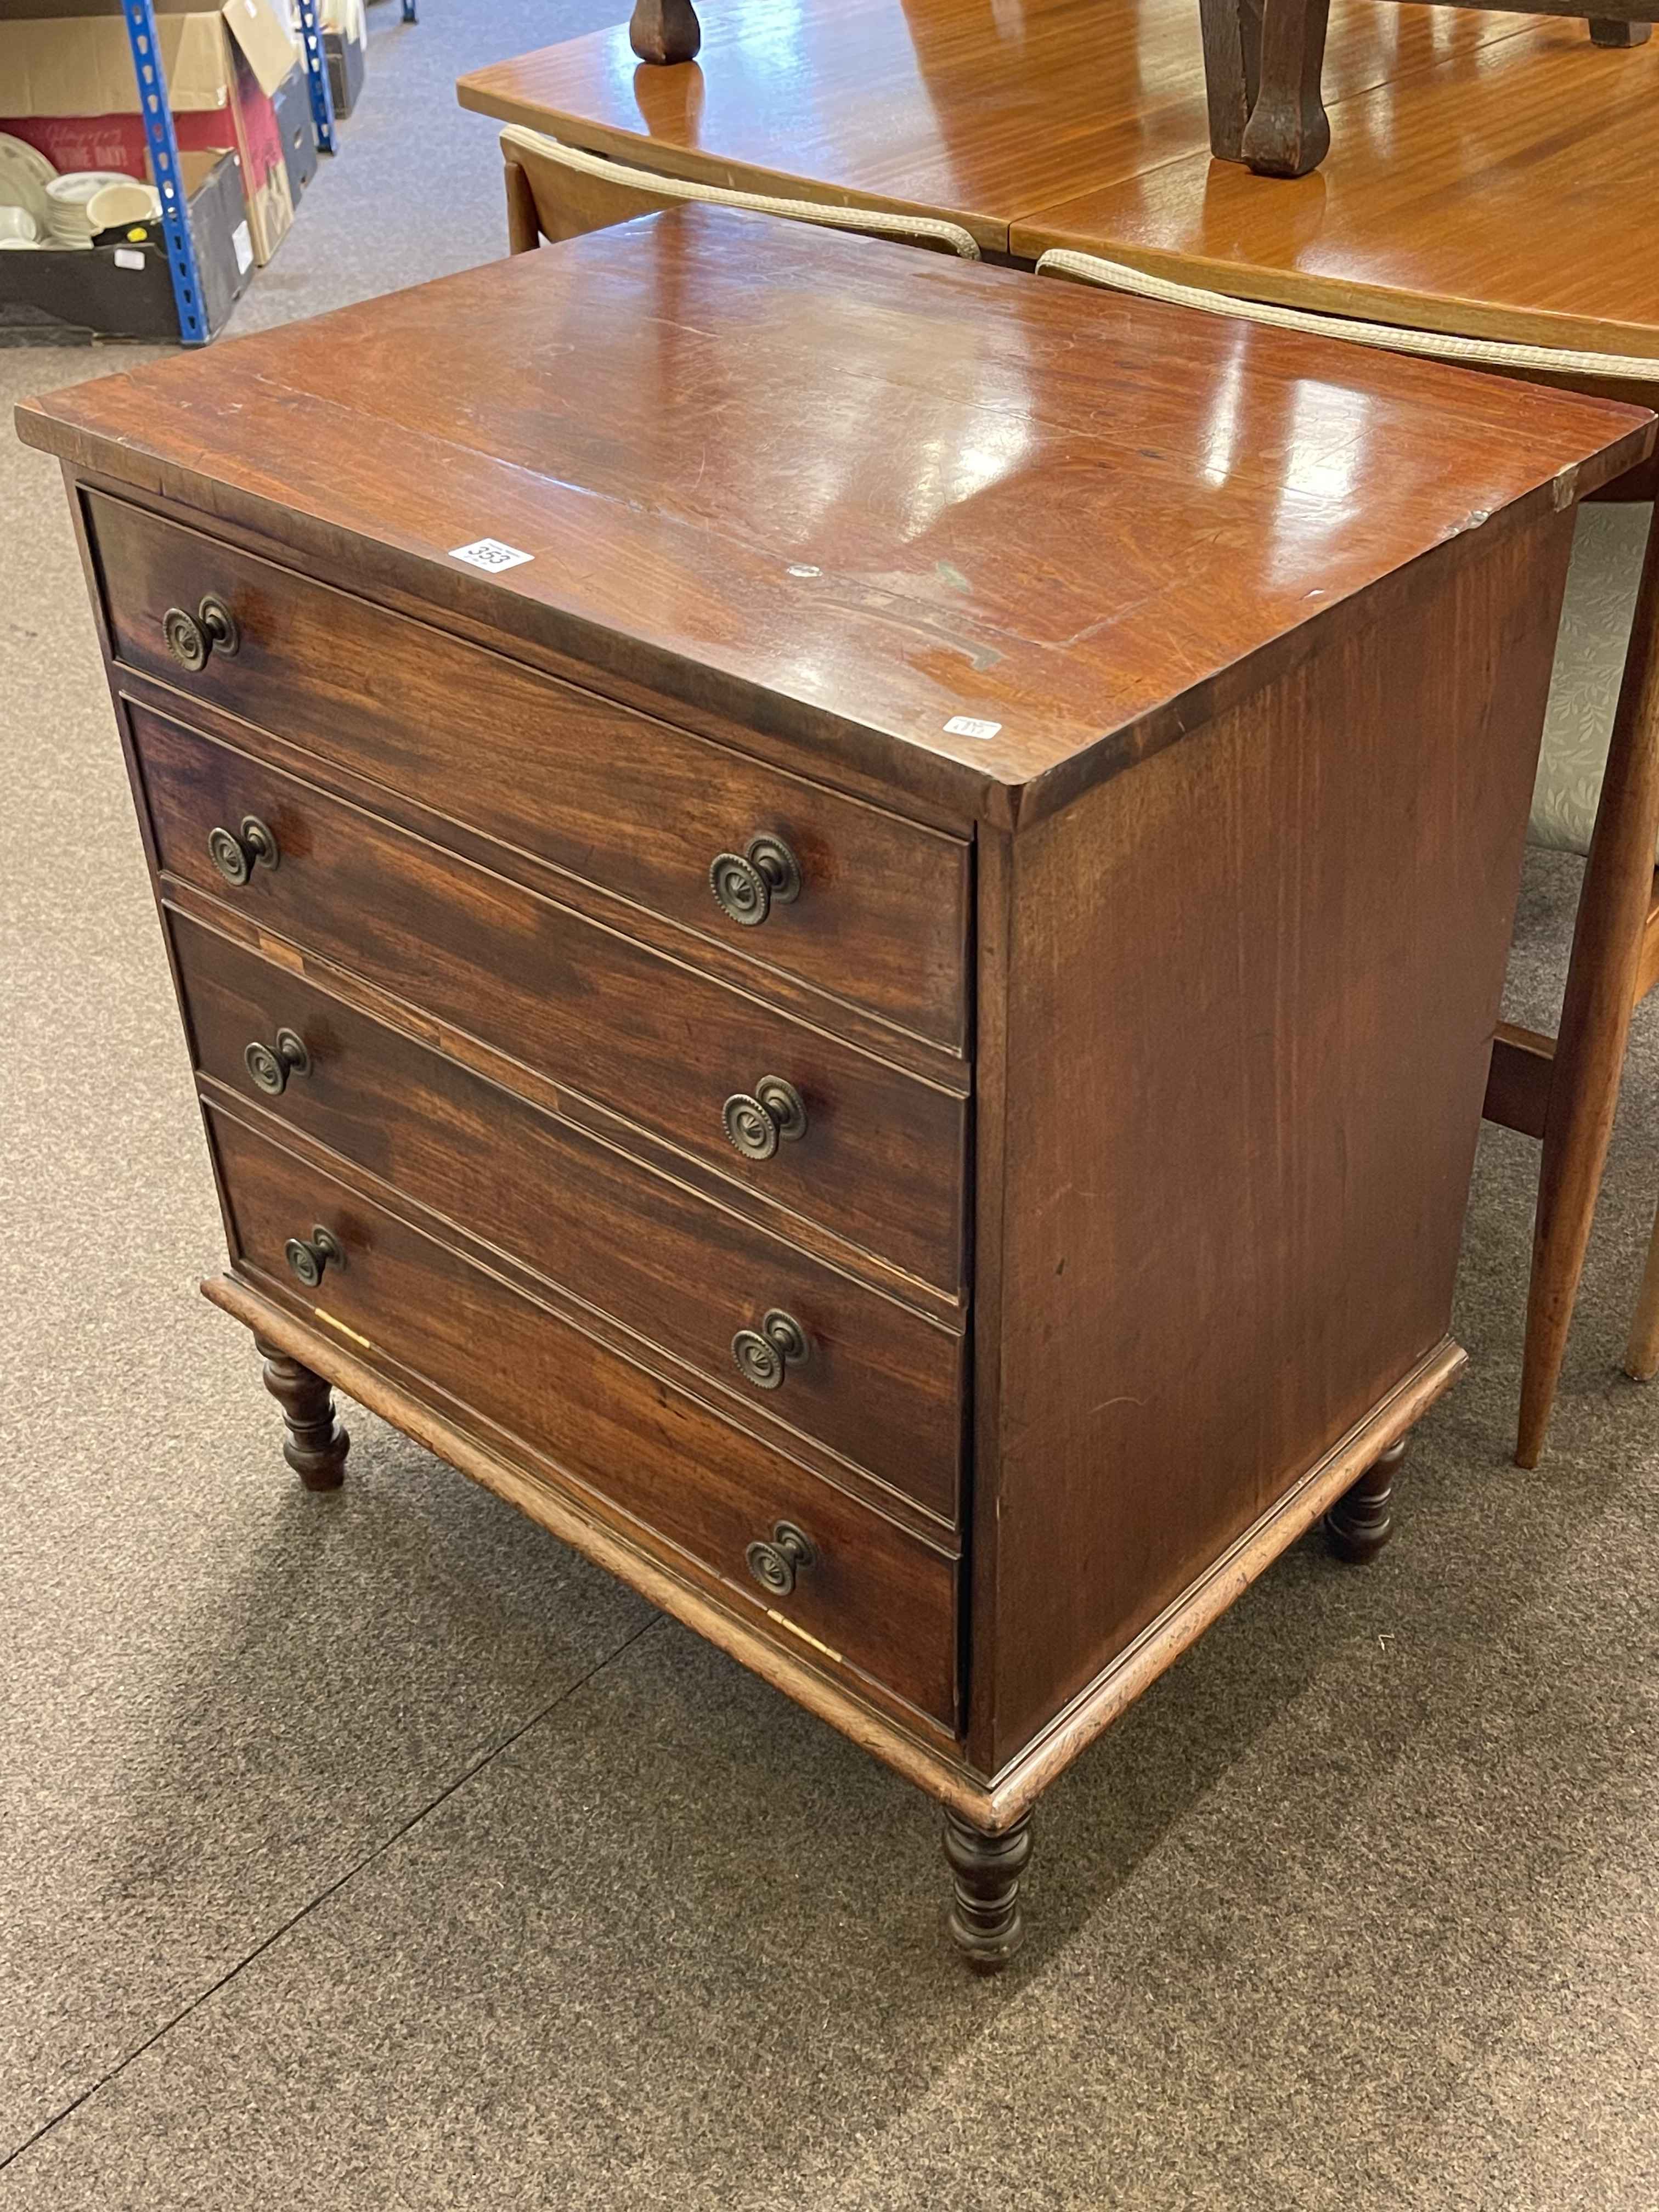 19th Century commode chest, 72cm by 63.5cm by 48cm.